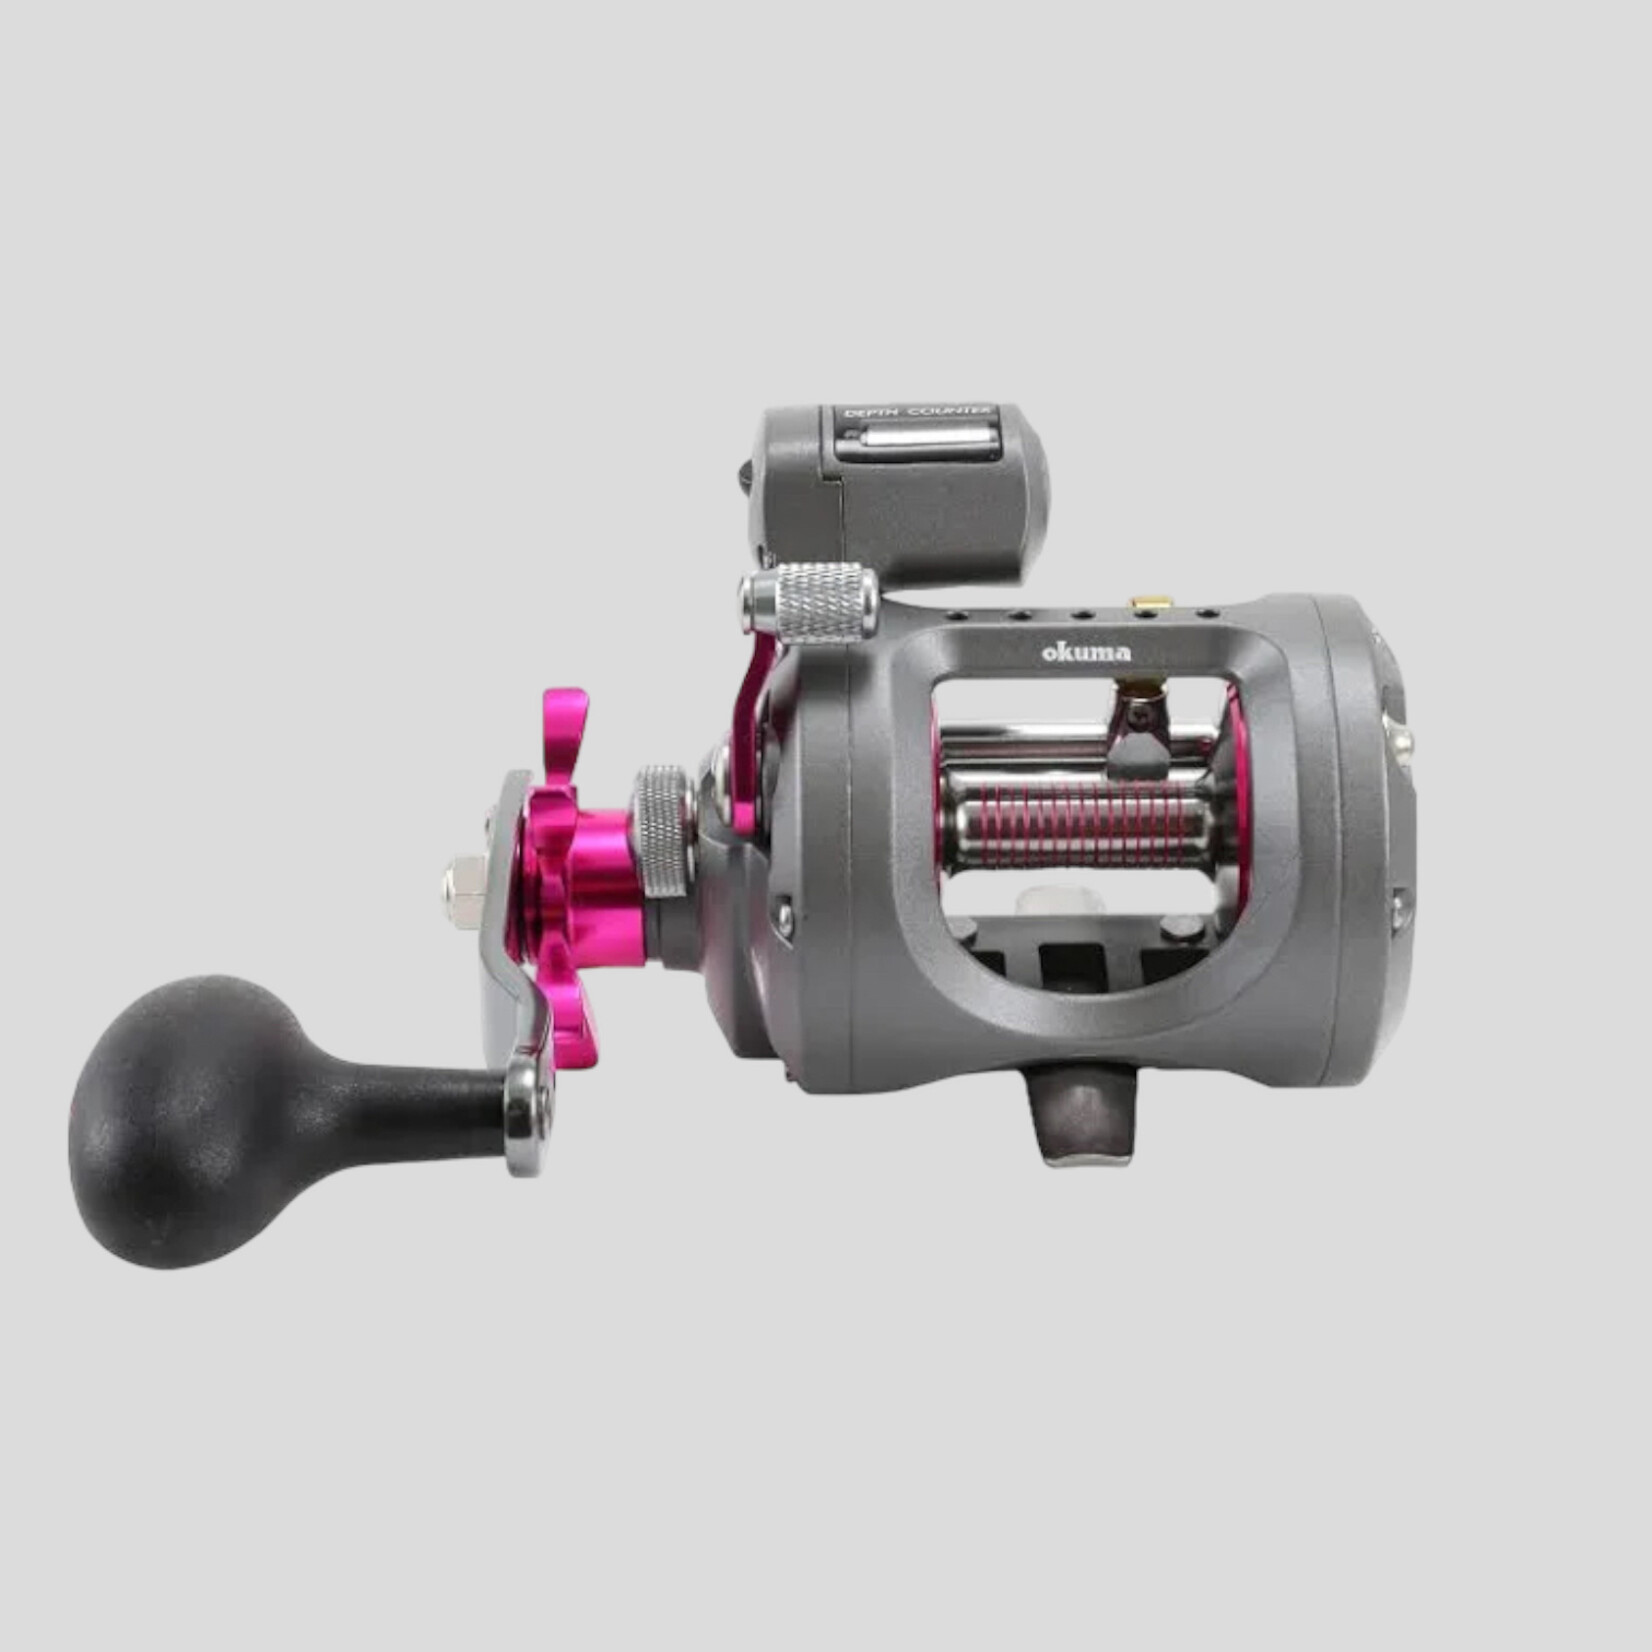 Okuma Cold Water Star Drag Line Counter 5.1:1 Fishing Reel, Left Hand,  CW-203DLX